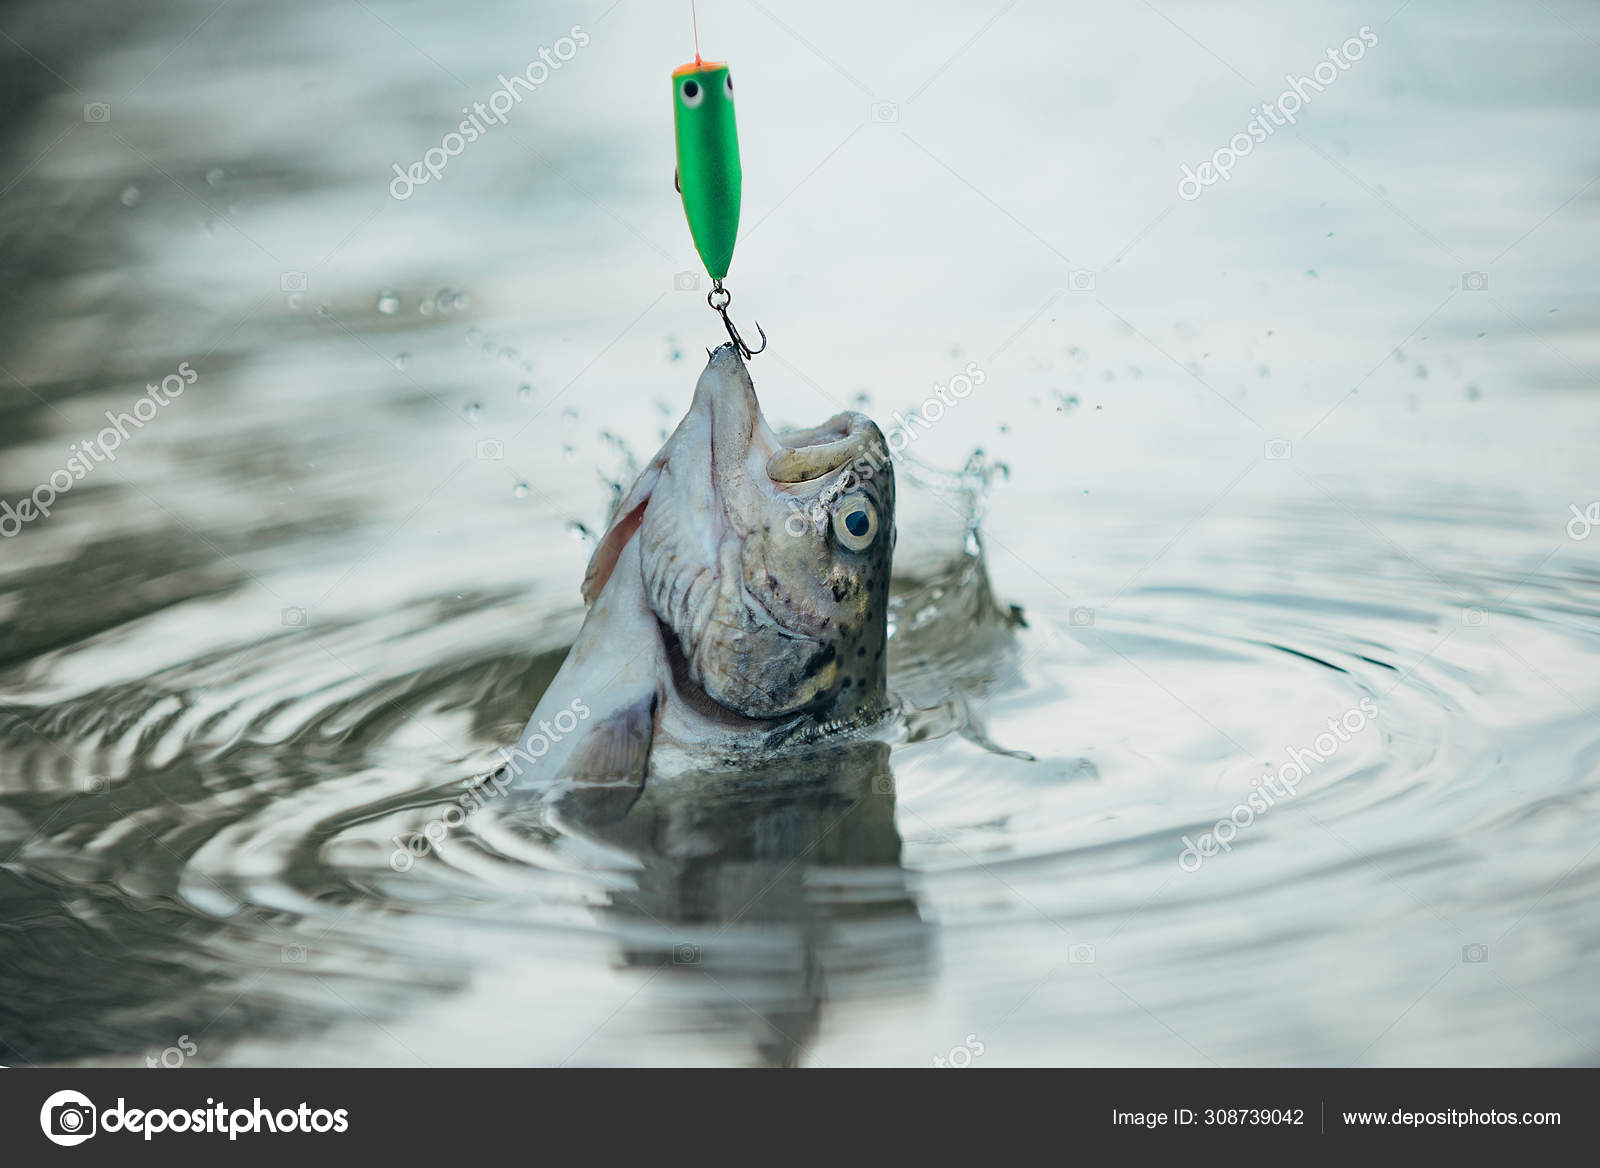 Fishes catching hooks. Fish trout on a hook. Brown trout being